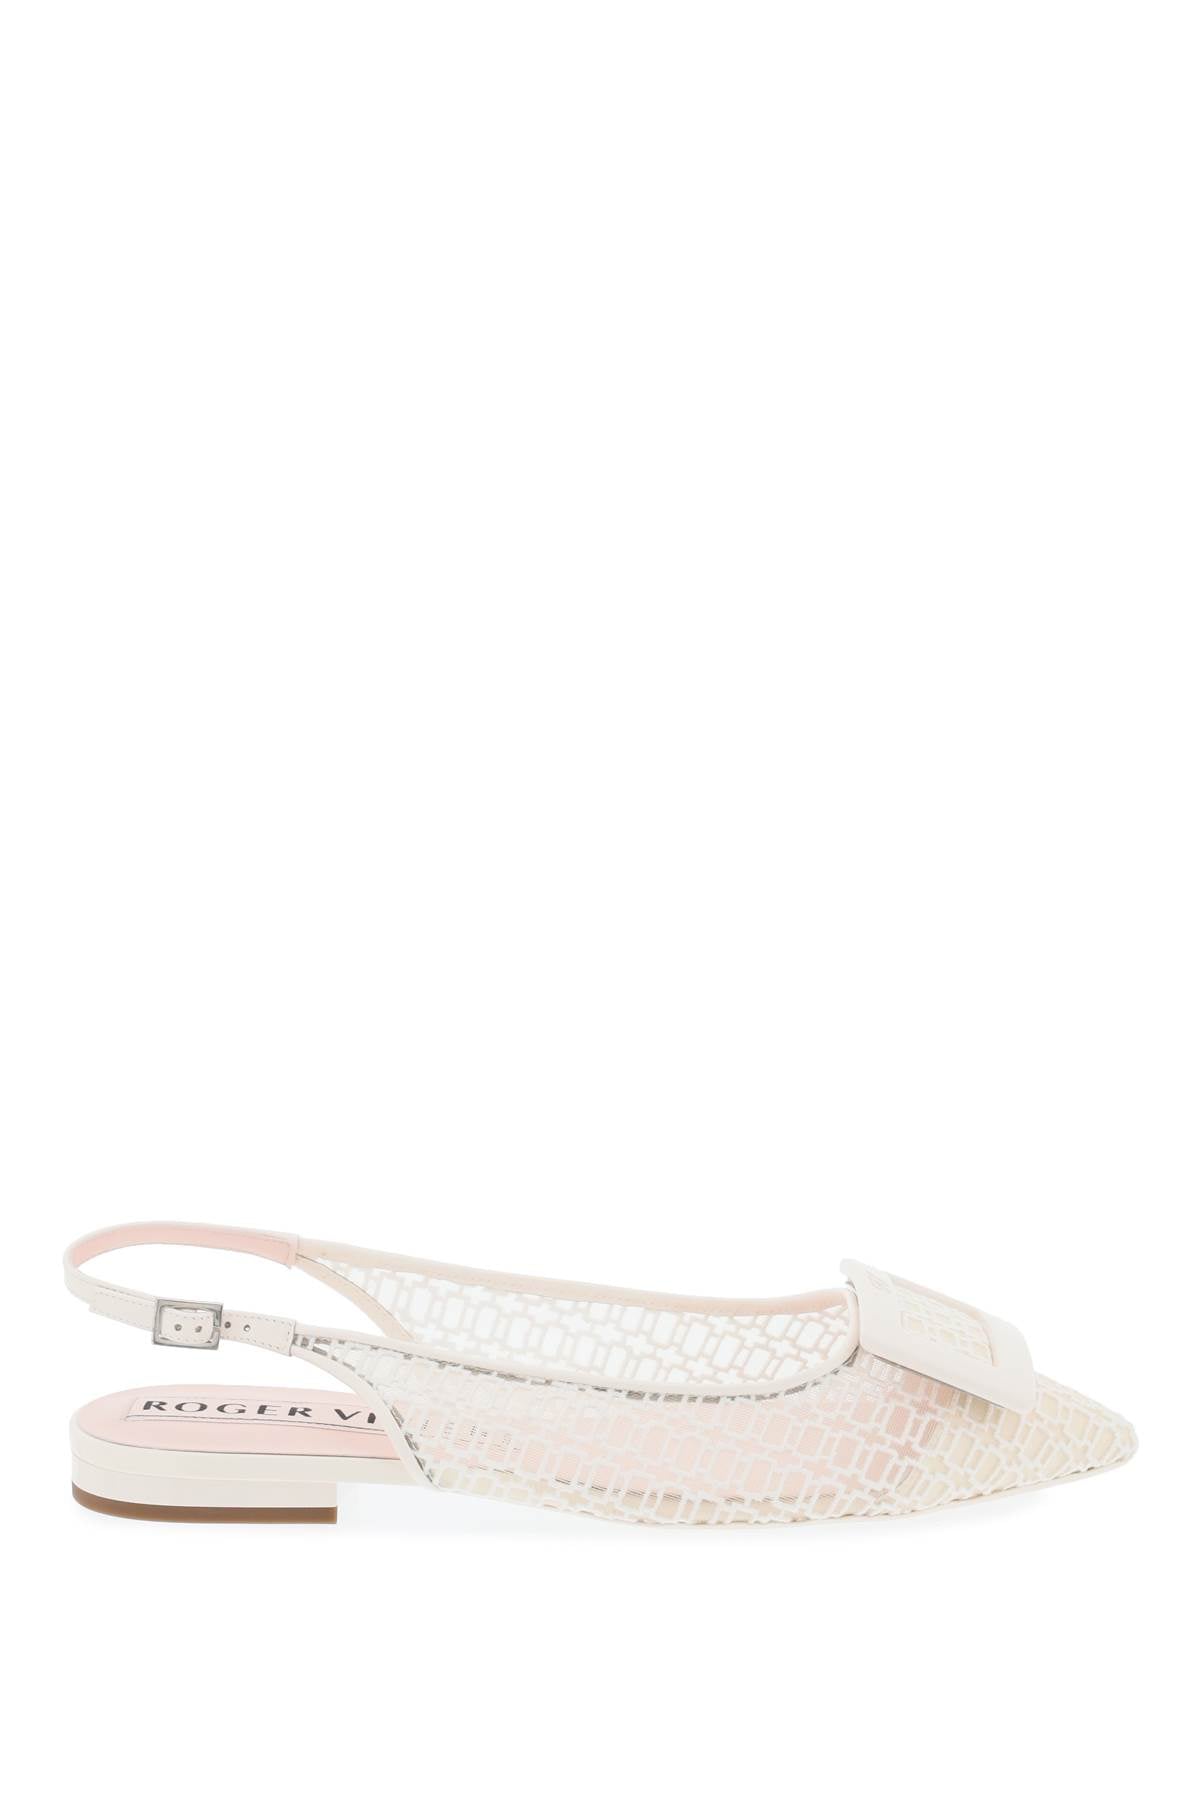 ROGER VIVIER White Mesh Slingback Ballet Flats | Embroidered | Leather Insole | Rubber Sole